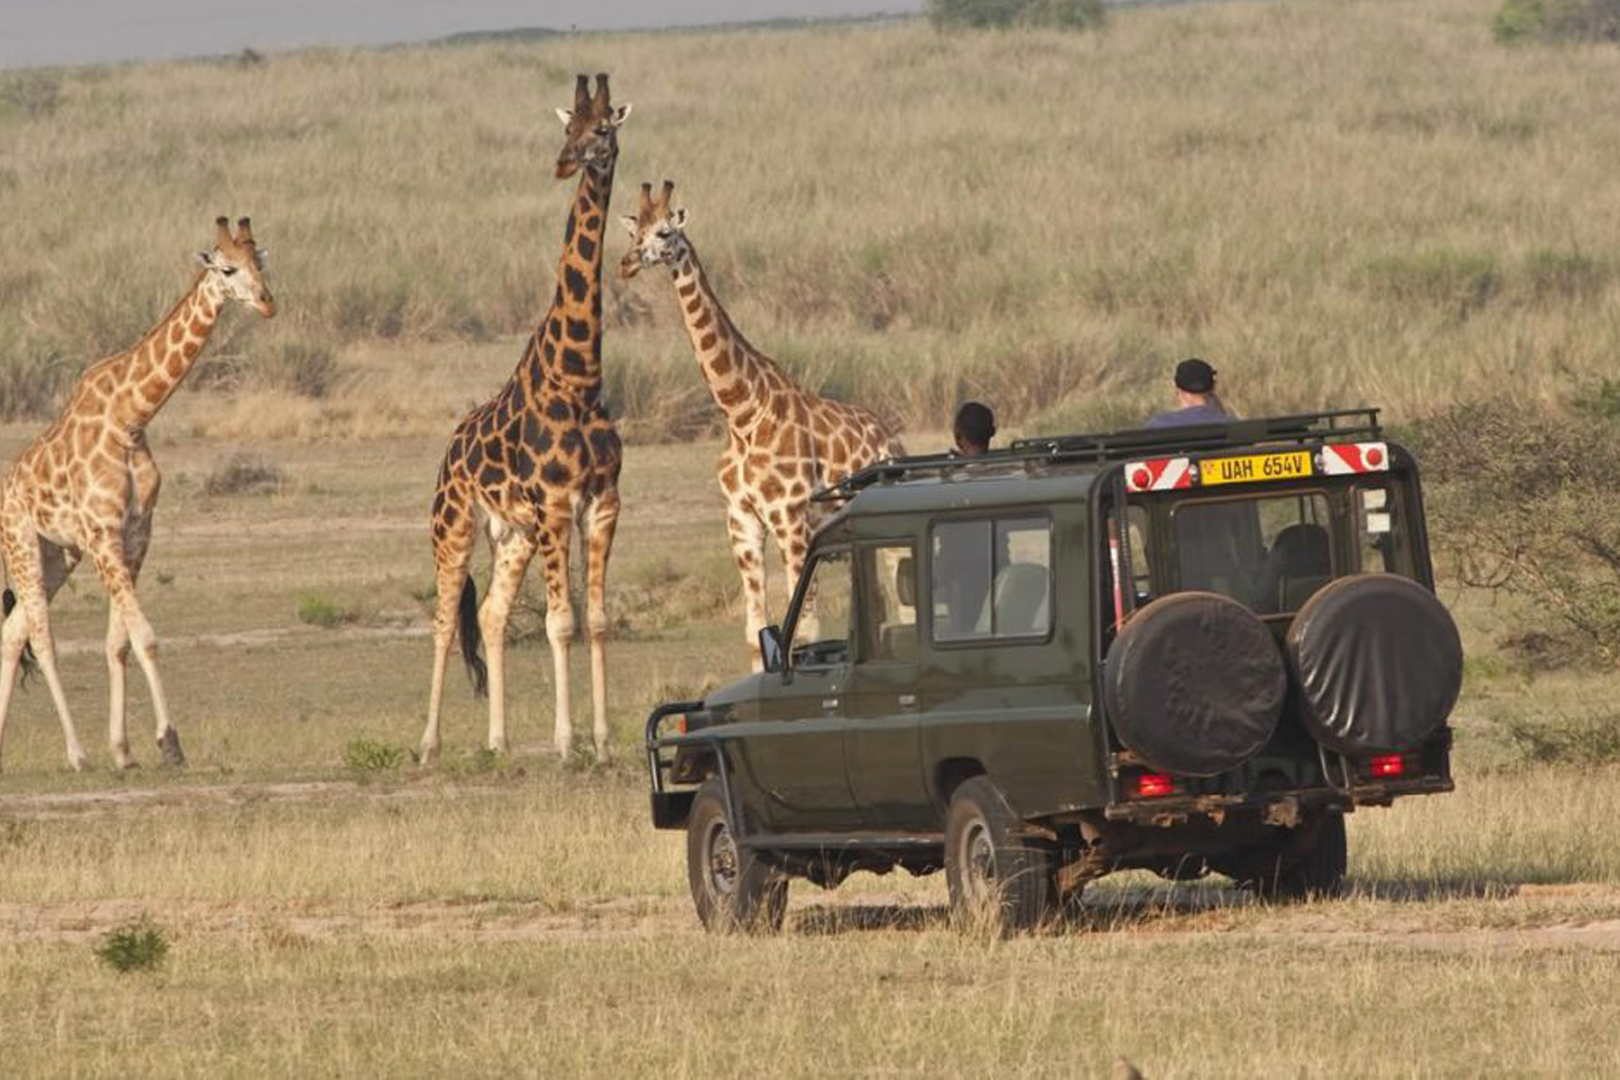 The gentle Rothschild's giraffes welcome guests to Kidepo Valley National Park. Kidepo Safaris